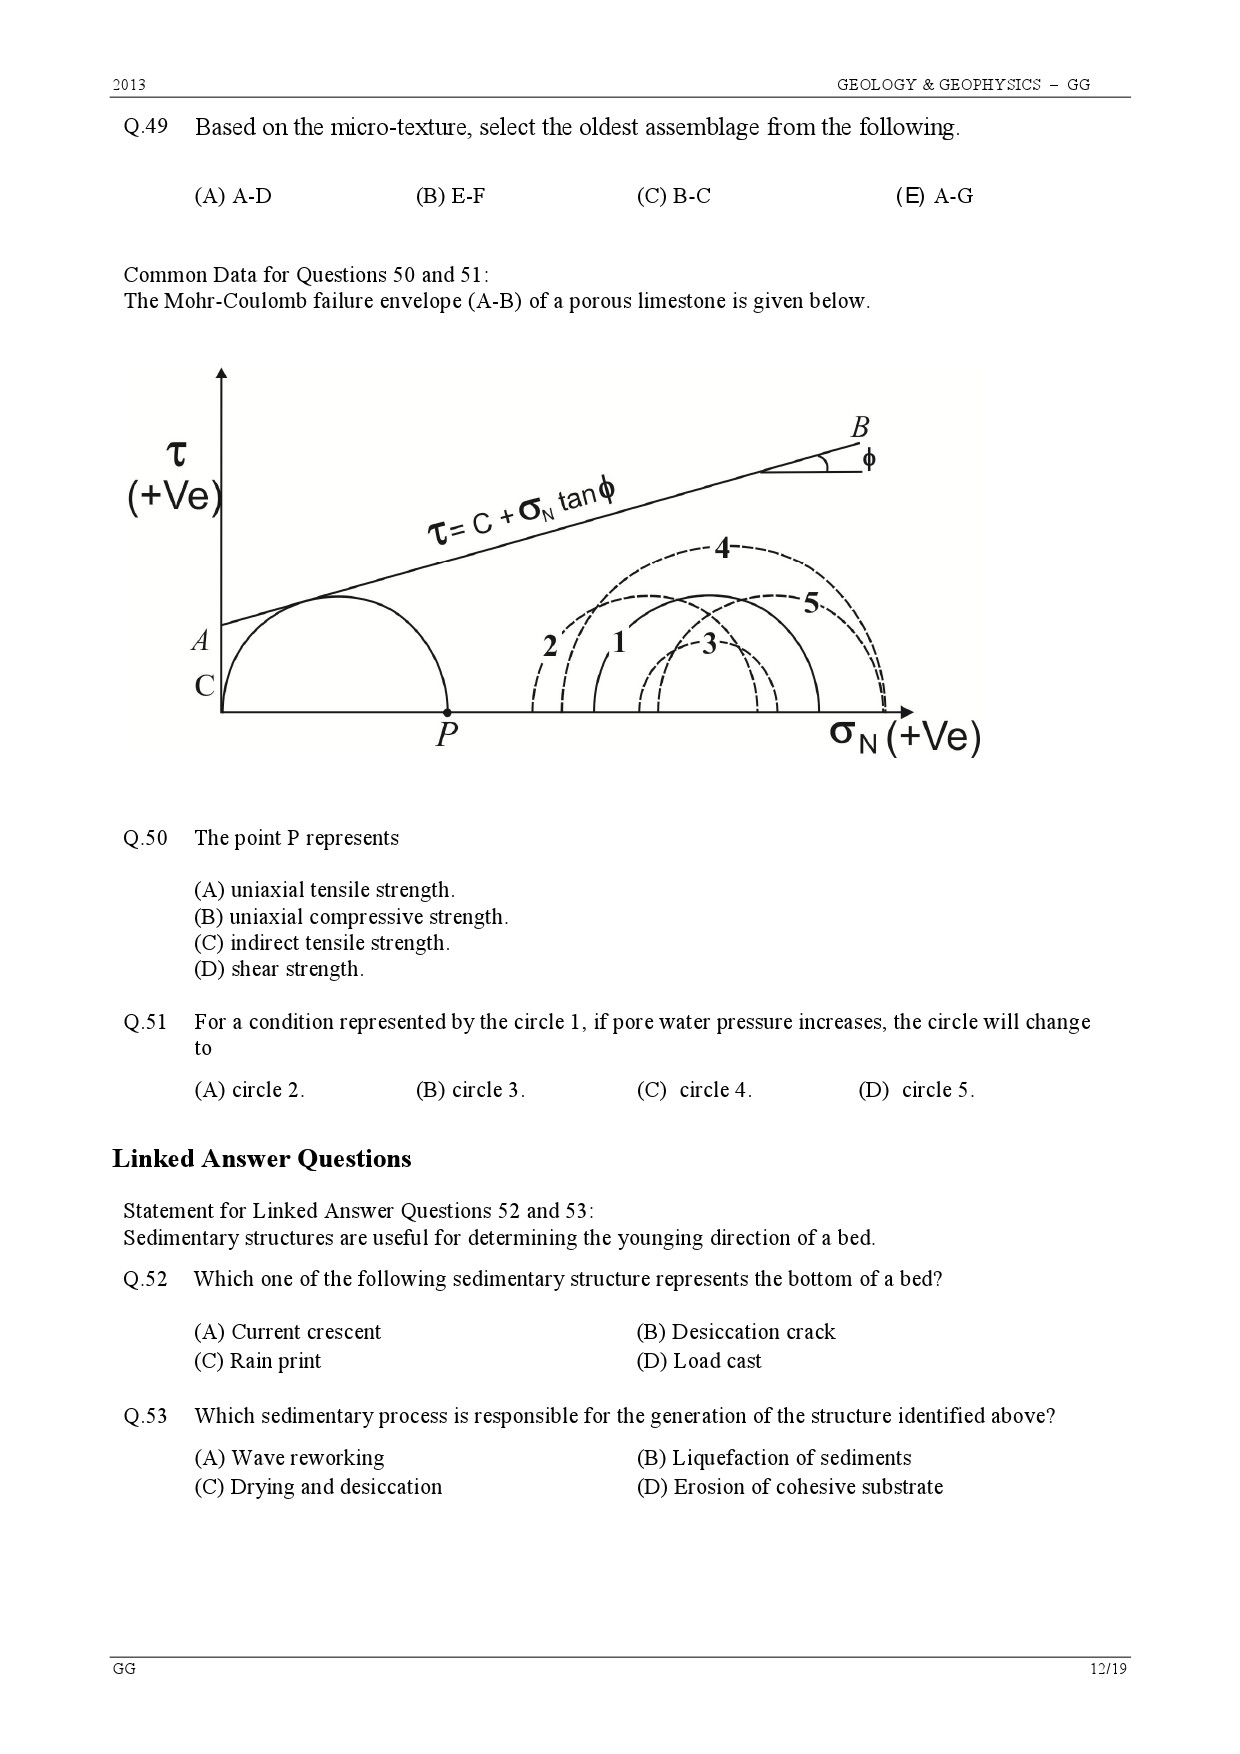 GATE Exam Question Paper 2013 Geology and Geophysics 12